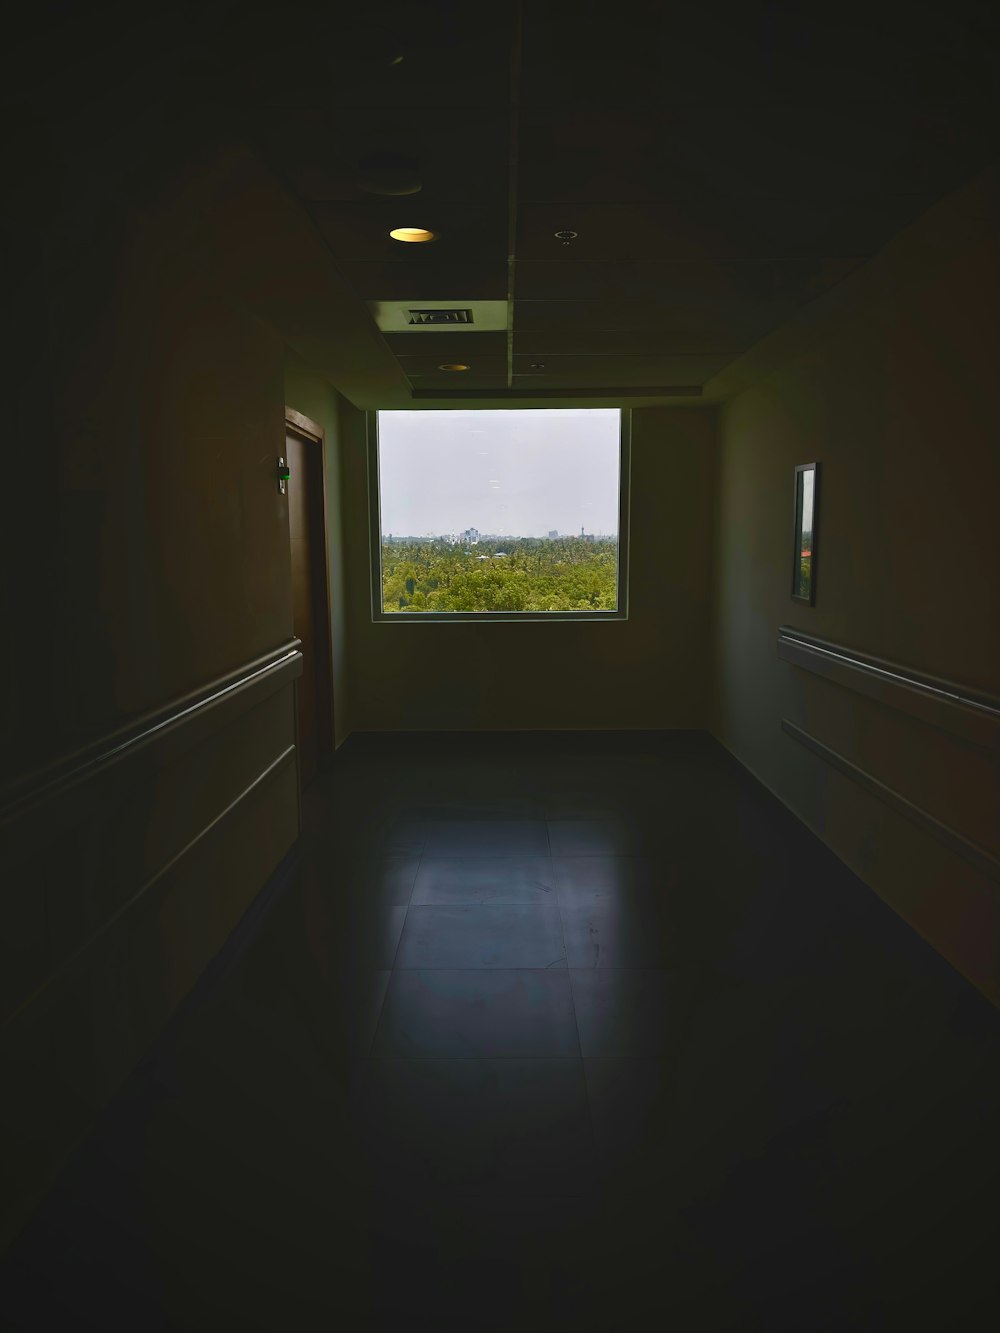 a dimly lit room with a large window